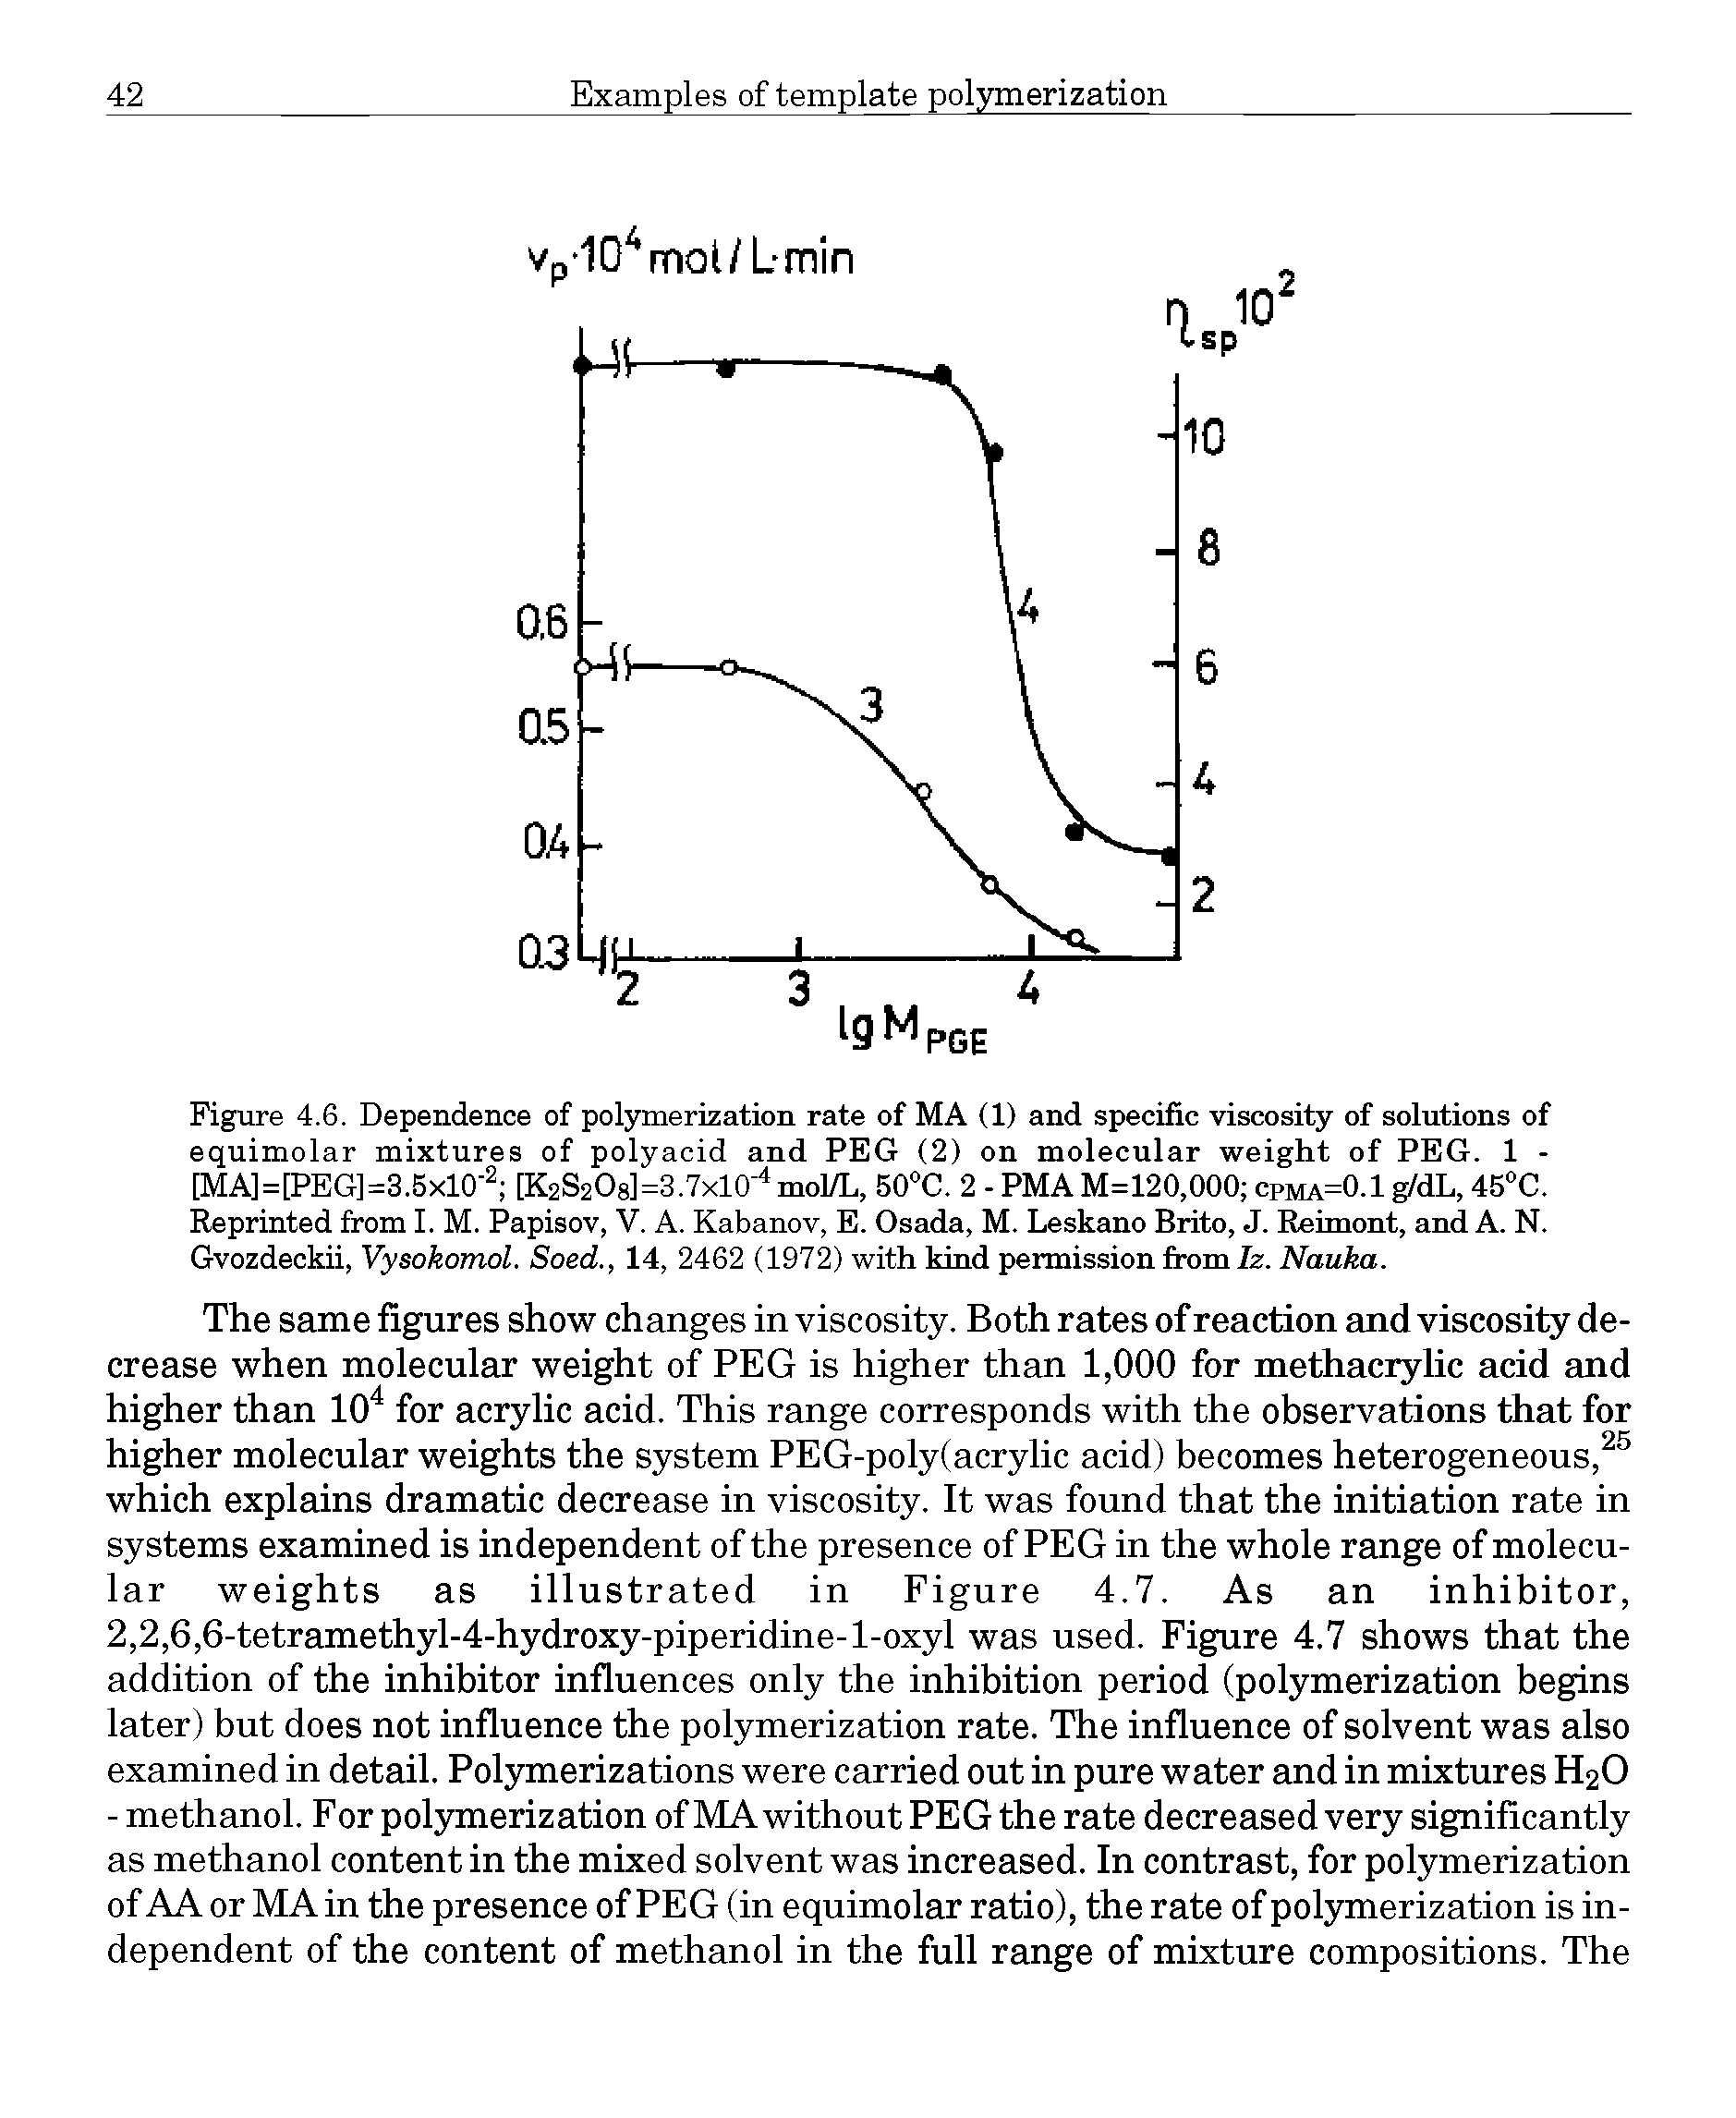 Figure 4.6. Dependence of polymerization rate of MA (1) and specific viscosity of solutions of equimolar mixtures of polyacid and PEG (2) on molecular weight of PEG. 1 -[MA]=[PEG]=3.BxlO [K2S2O8l=3.7xl0- mol/L, 50 C. 2 - PMAM=120,000 cpma=0.1 g/dL, 45"C. Reprinted from I. M. Papisov, V. A. Kabanov, E. Osada, M. Leskano Brito, J. Reimont, and A. N. Gvozdeckii, Vysokomol. Soed., 14, 2462 (1972) with kind permission from Iz. Nauka.